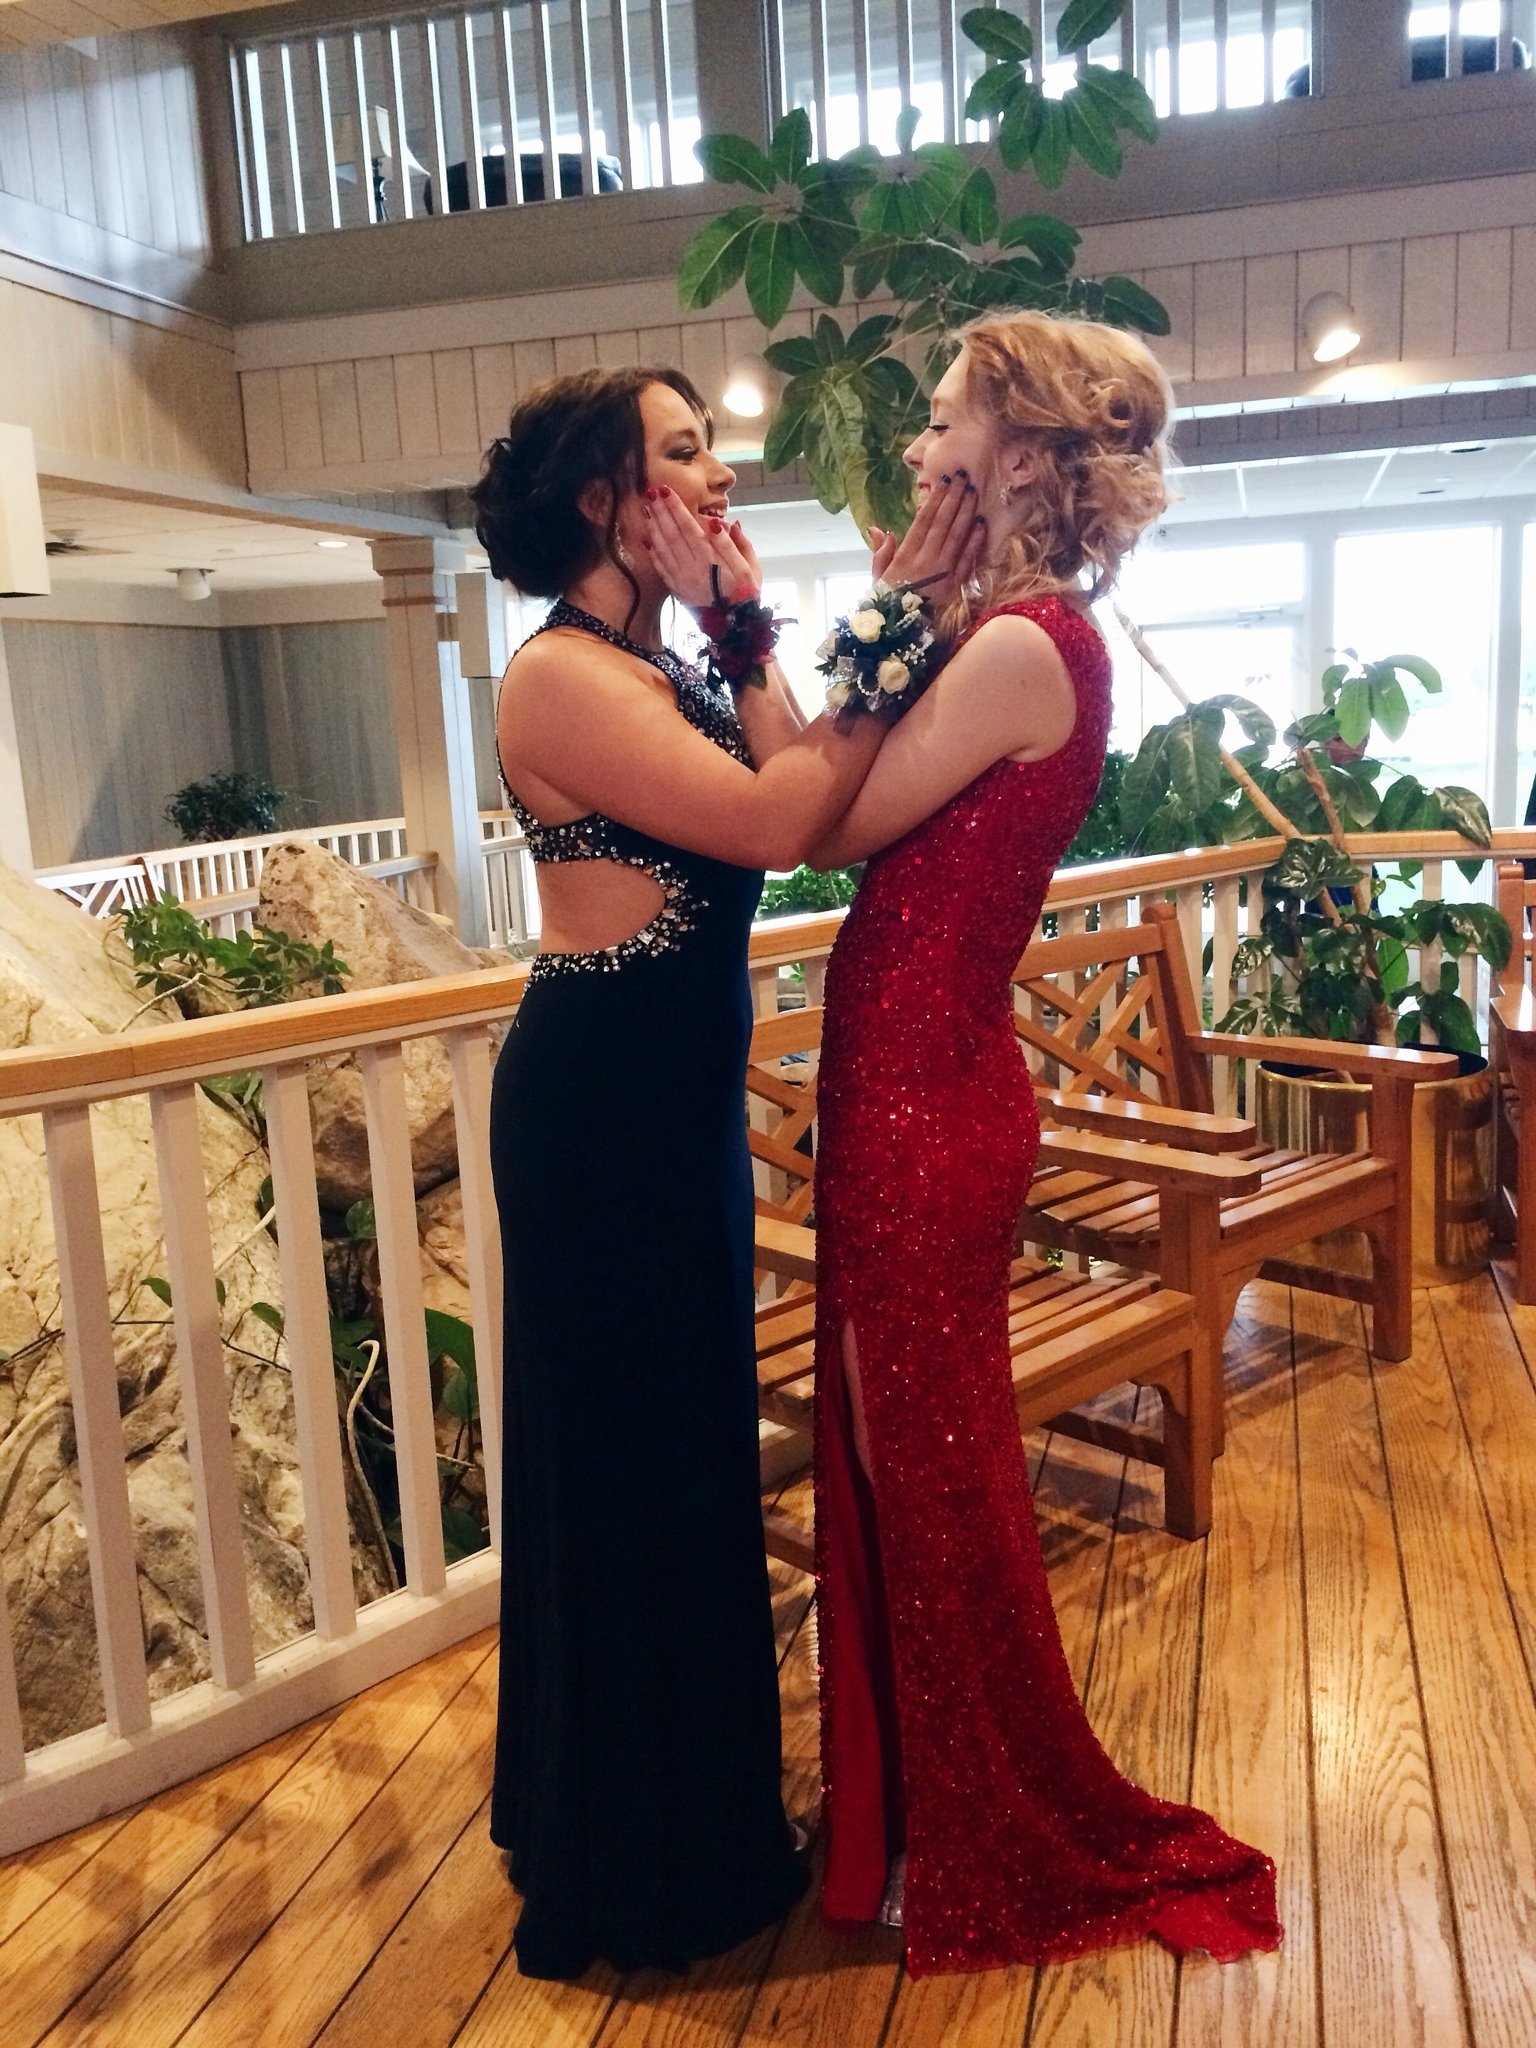 10 Famous Best Friend Prom Picture Ideas prom picture with best friend and pretty dress and hair prom 2022